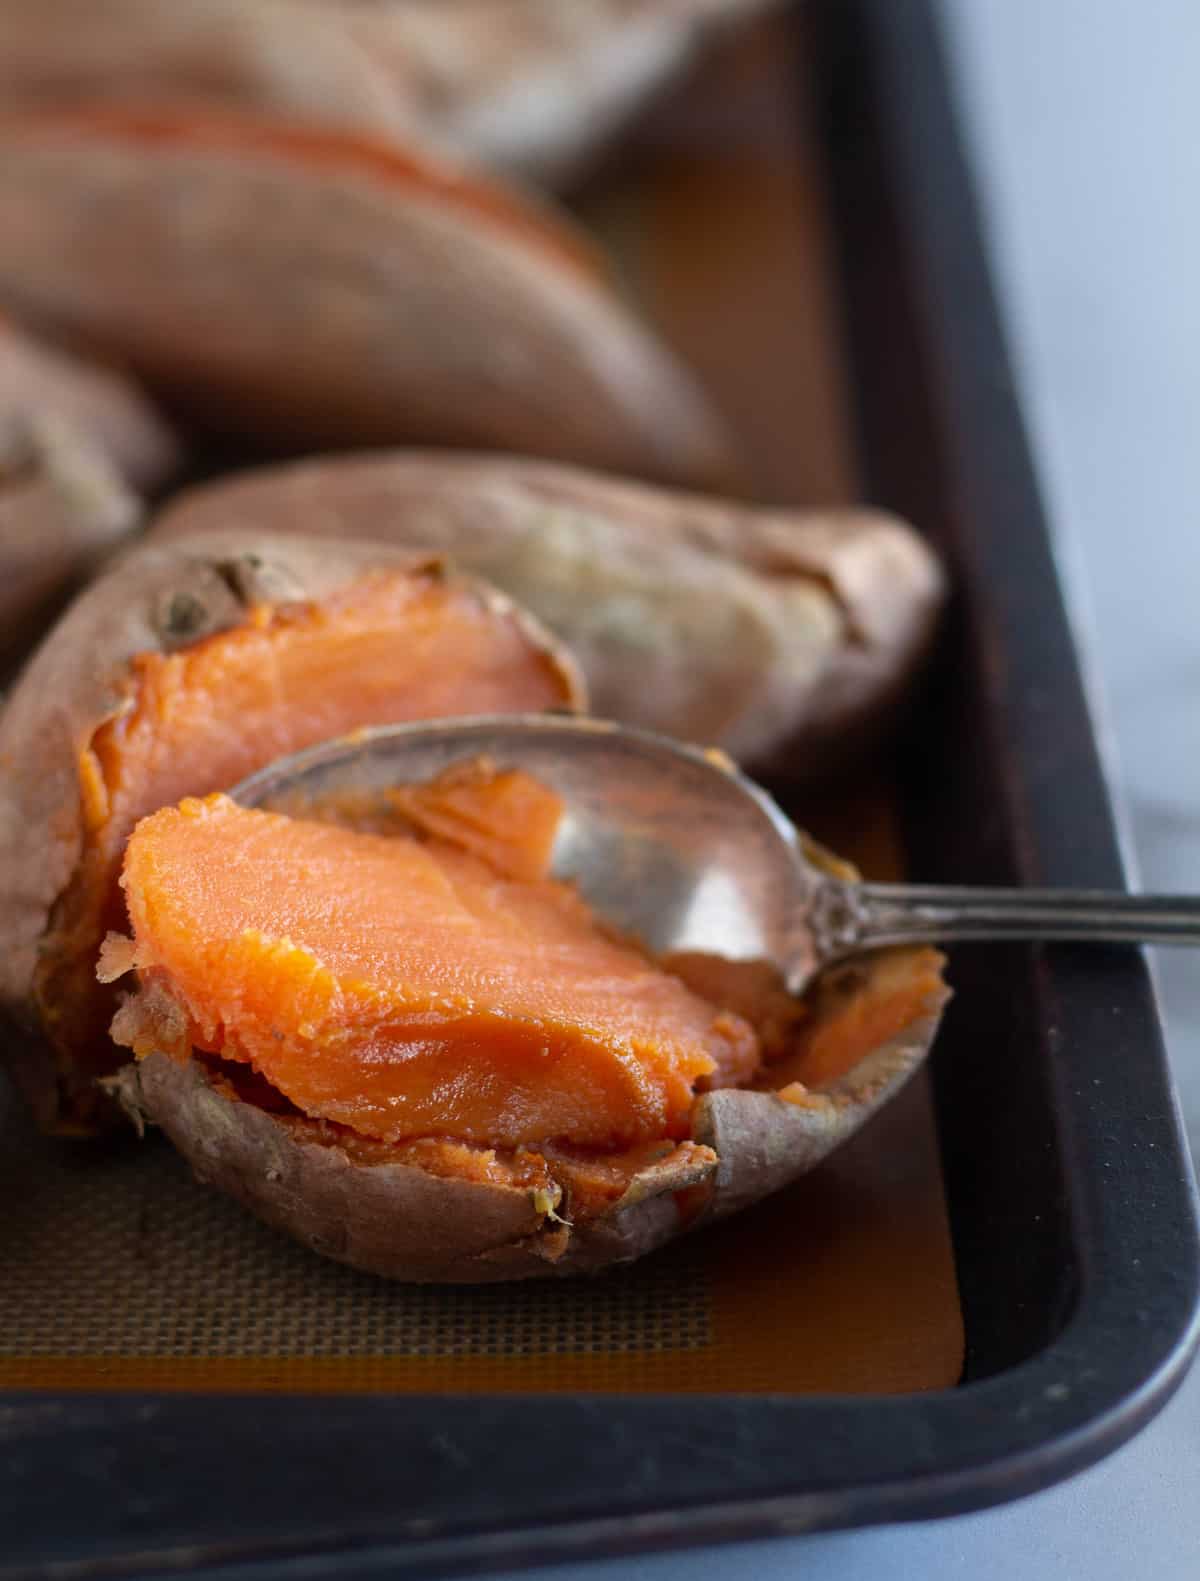 scooping out the flesh of a baked sweet potato.